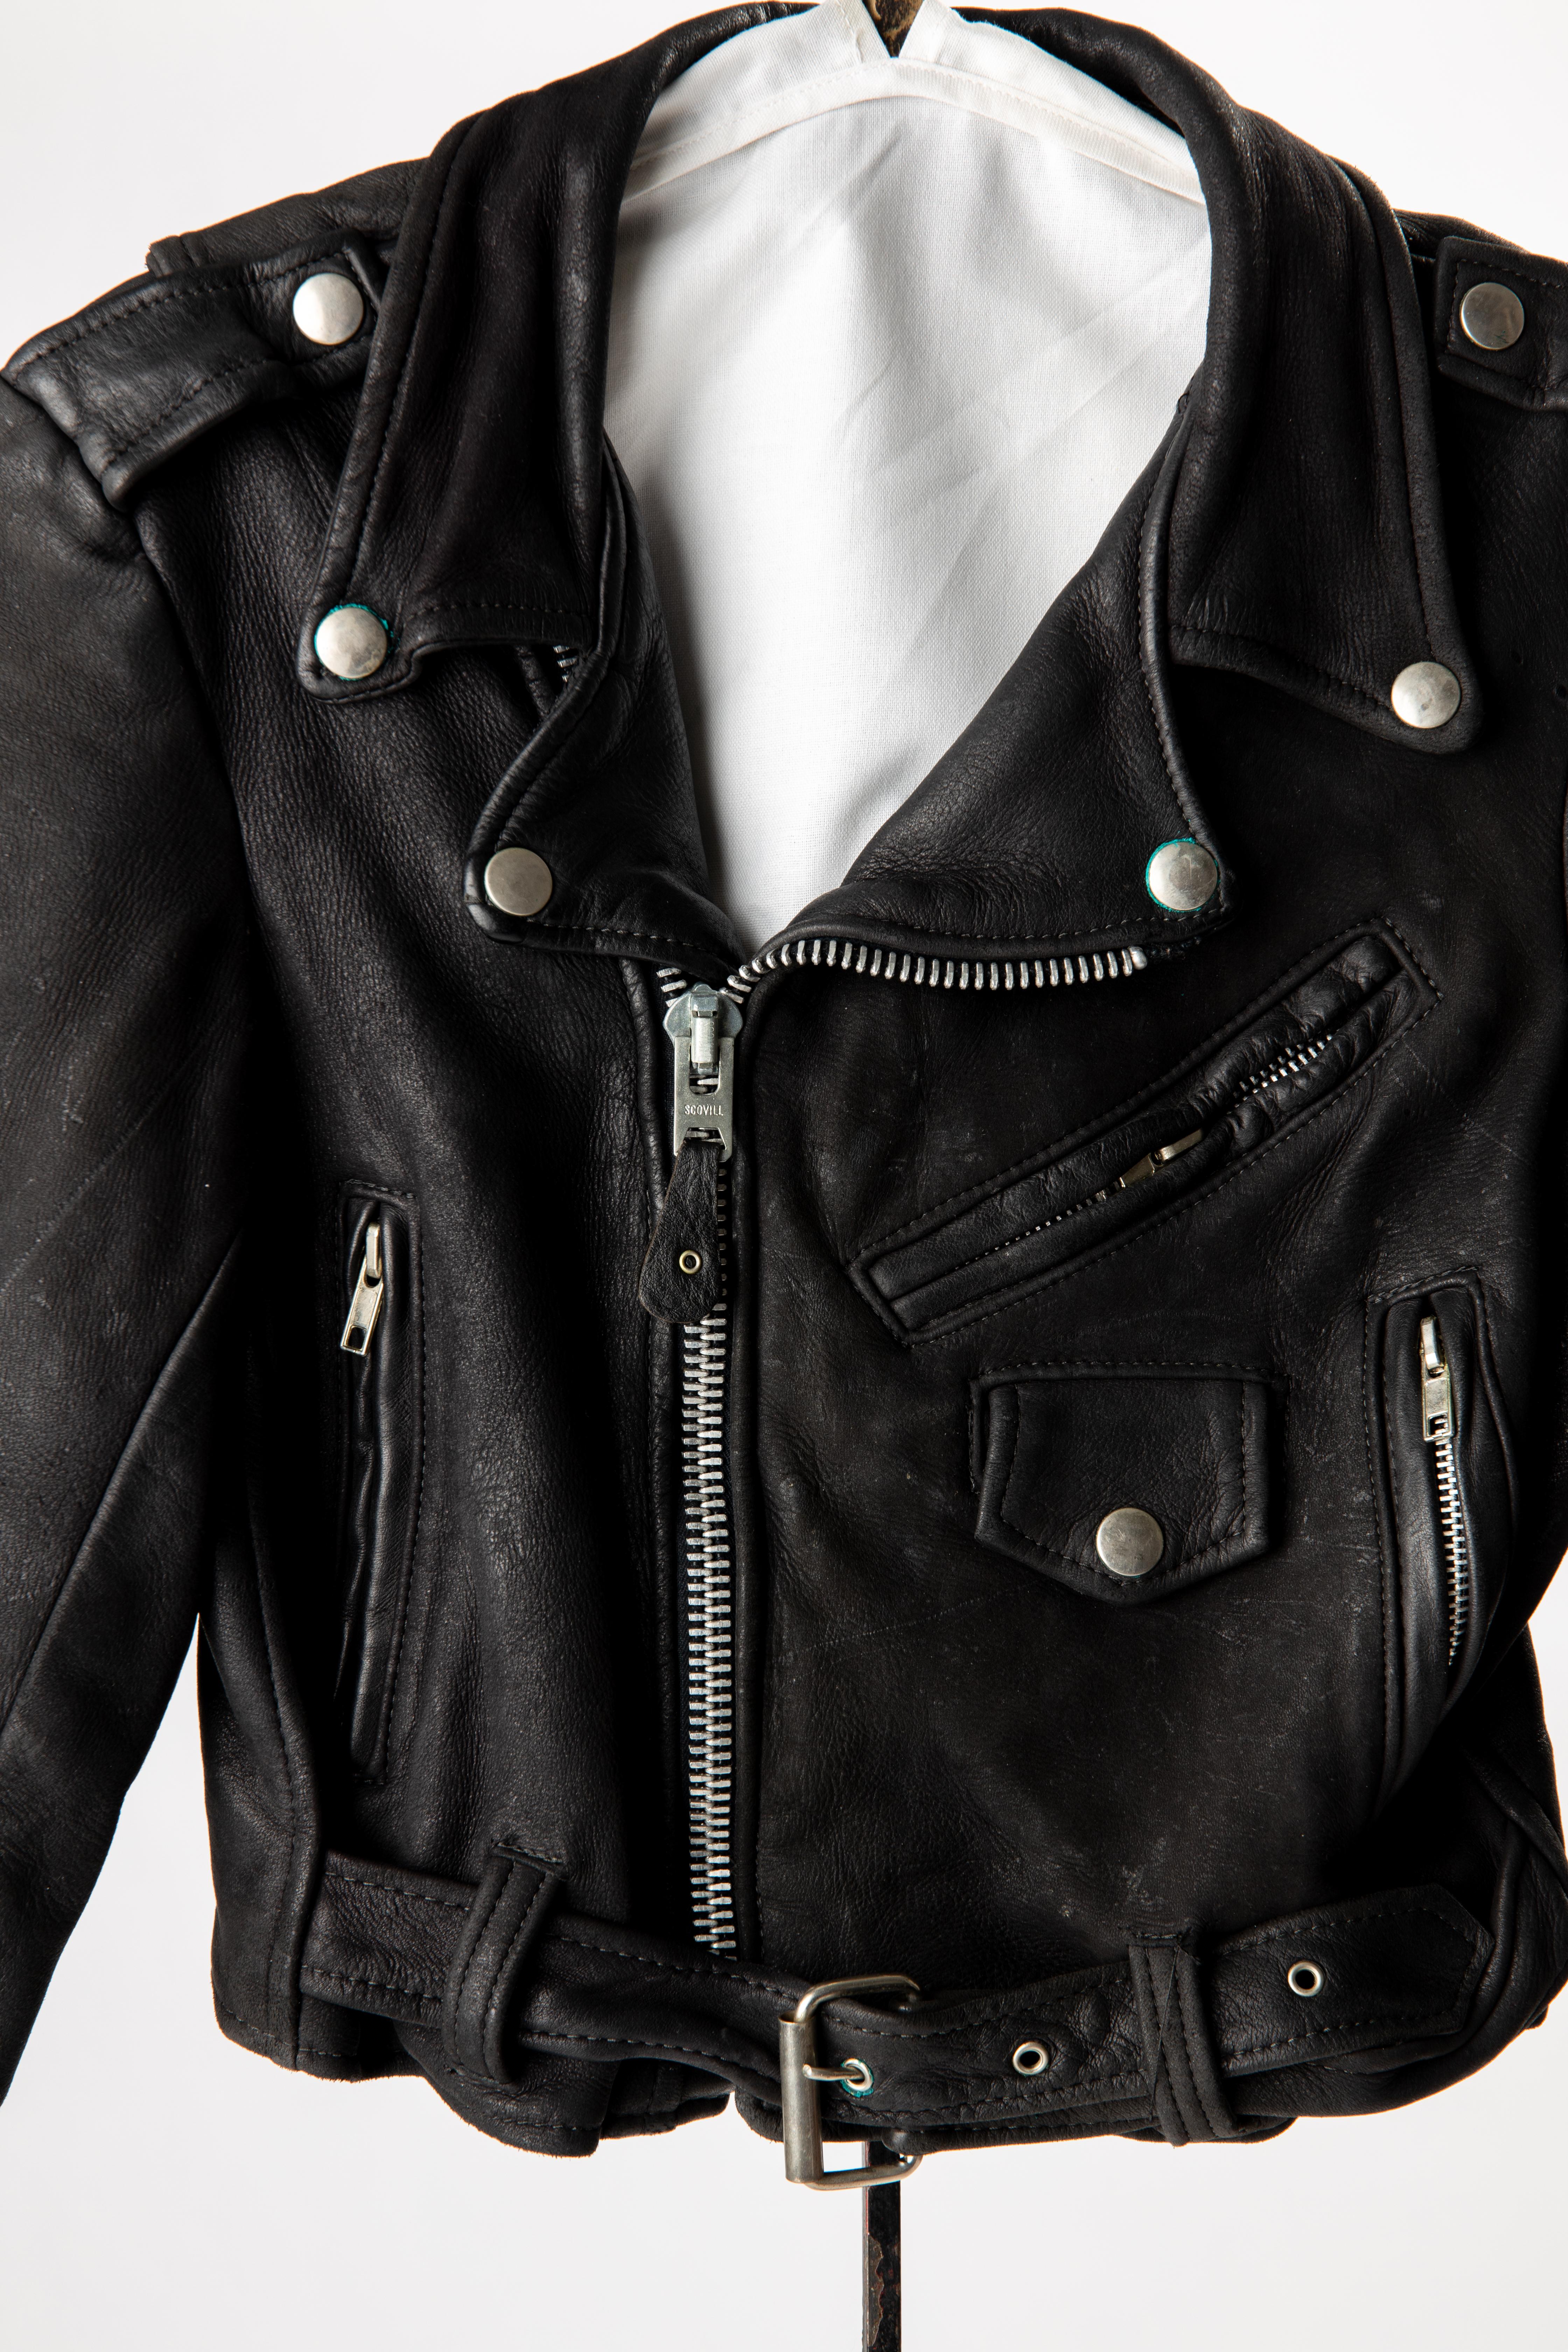 vintage leather motorcycle jackets